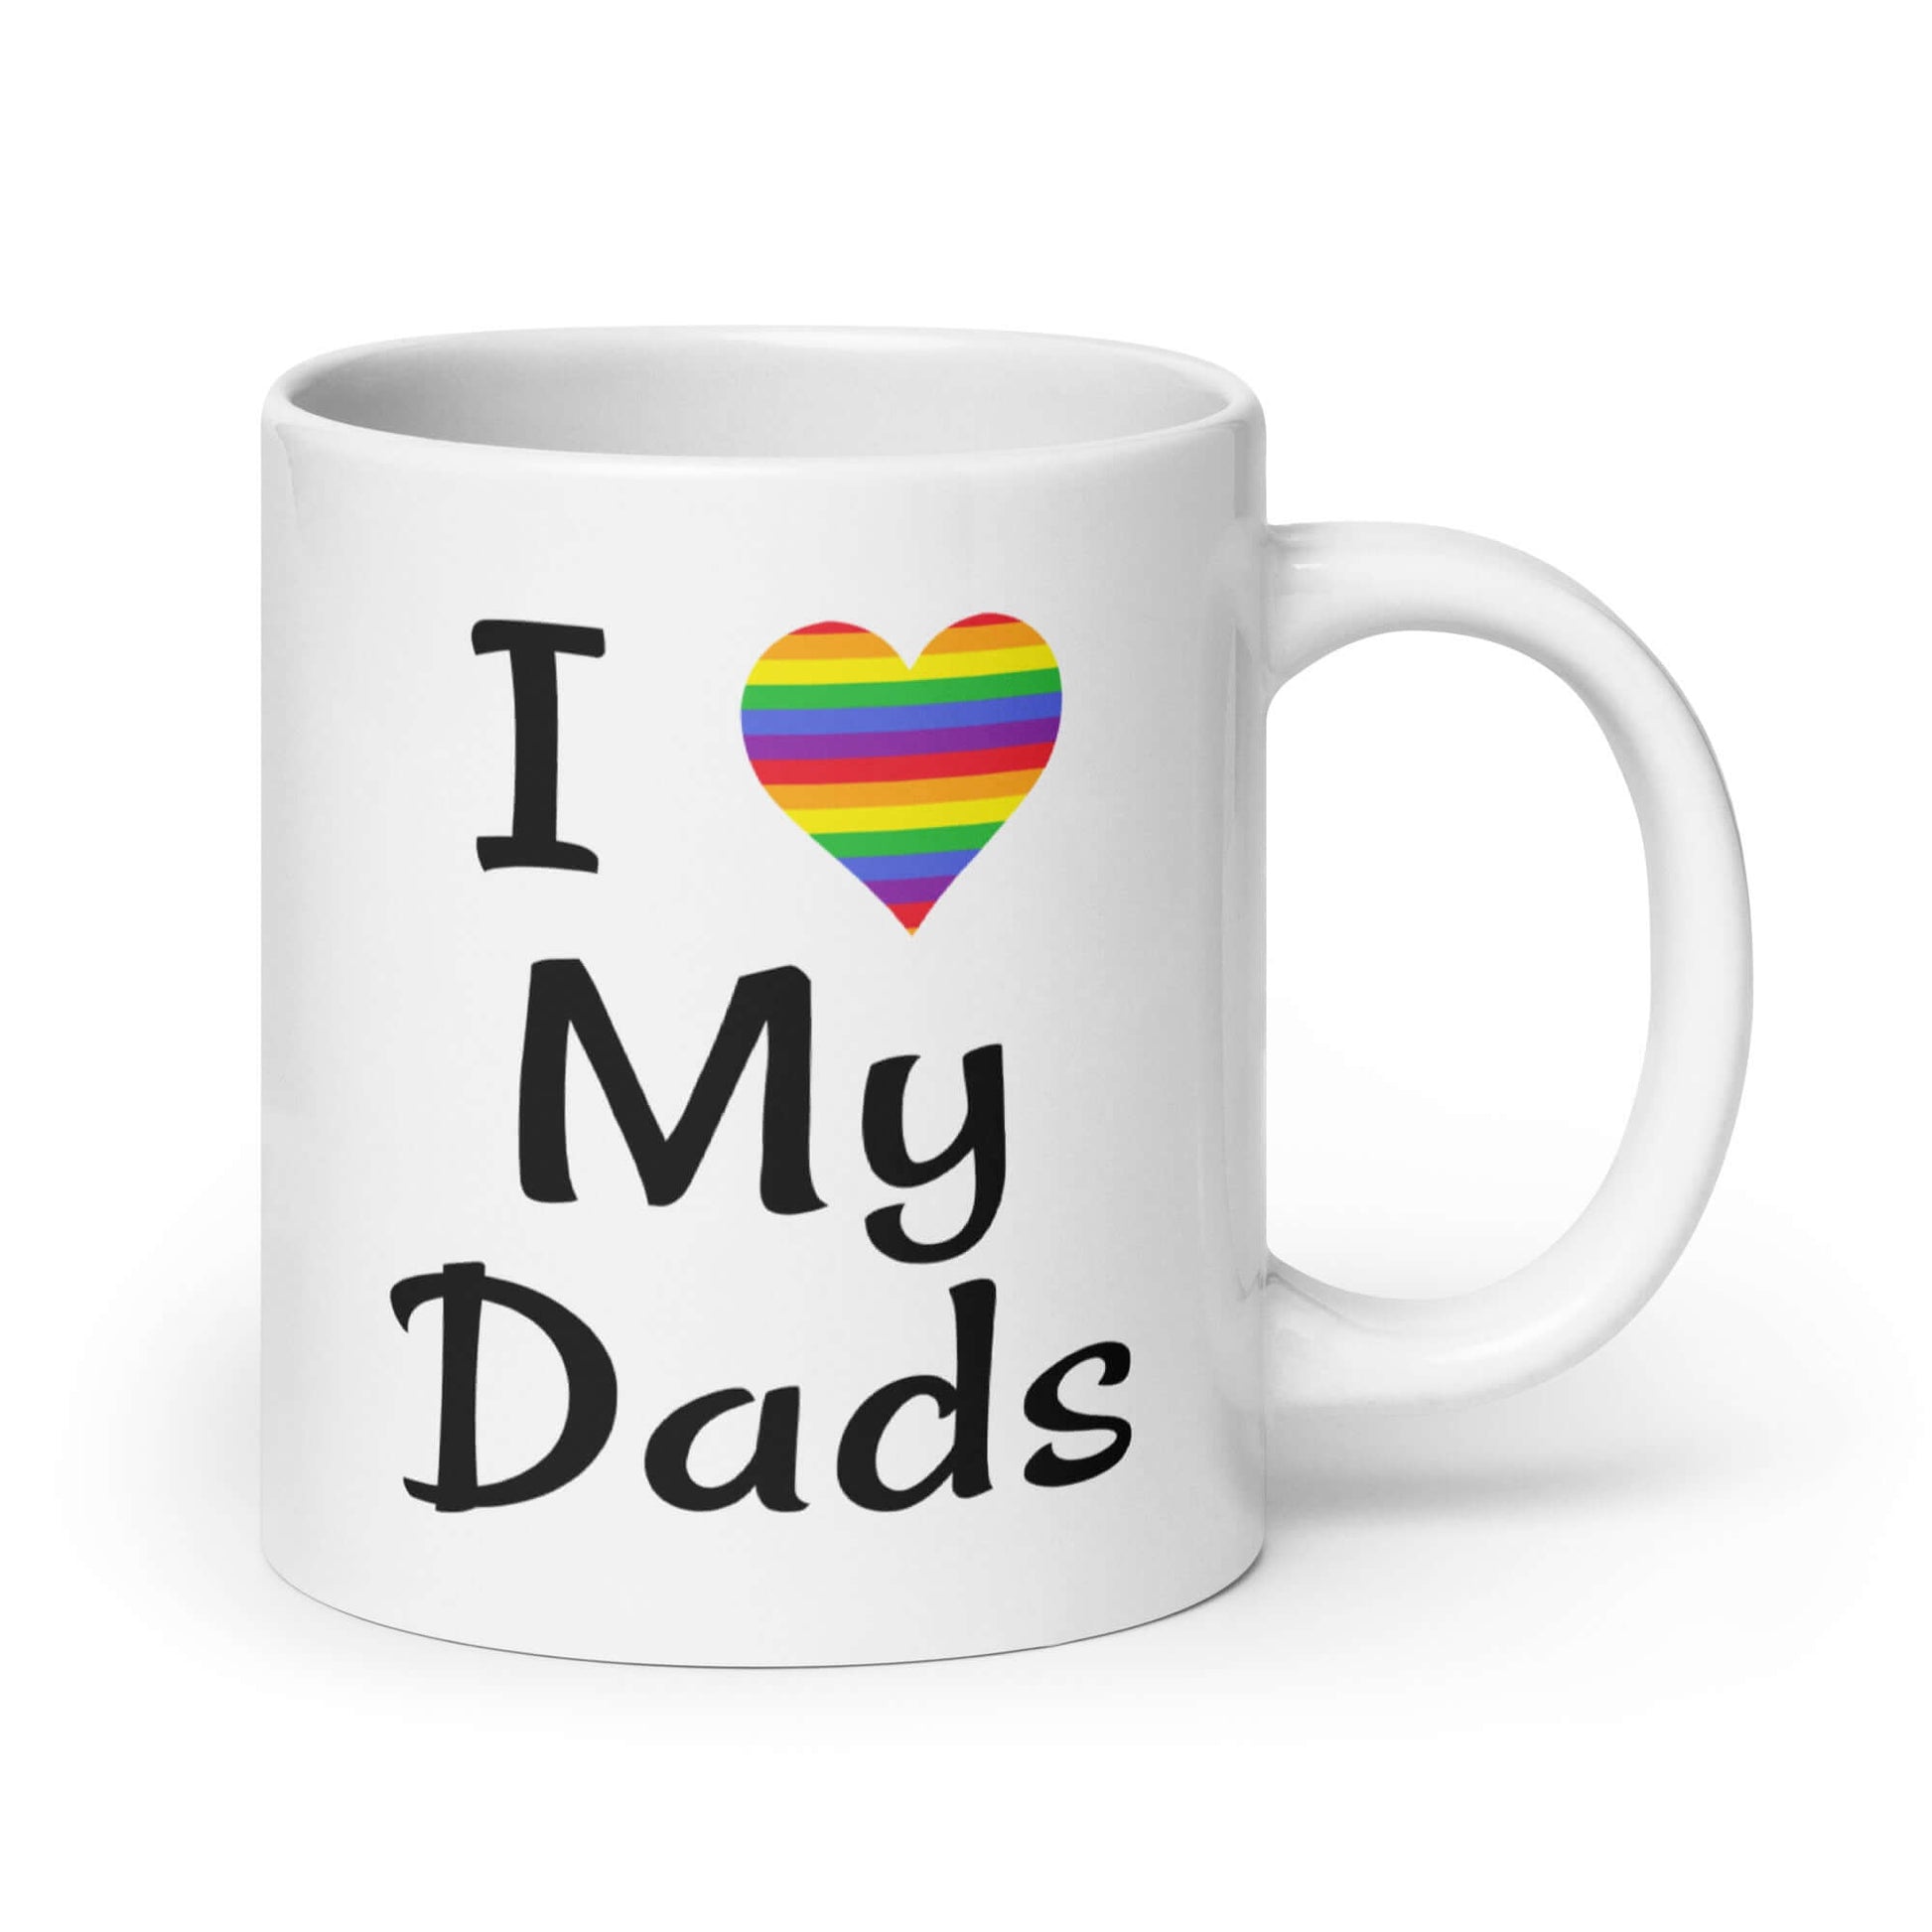 White ceramic coffee mug with the phrase I heart my dads printed on both sides of the mug. The heart is rainbow.